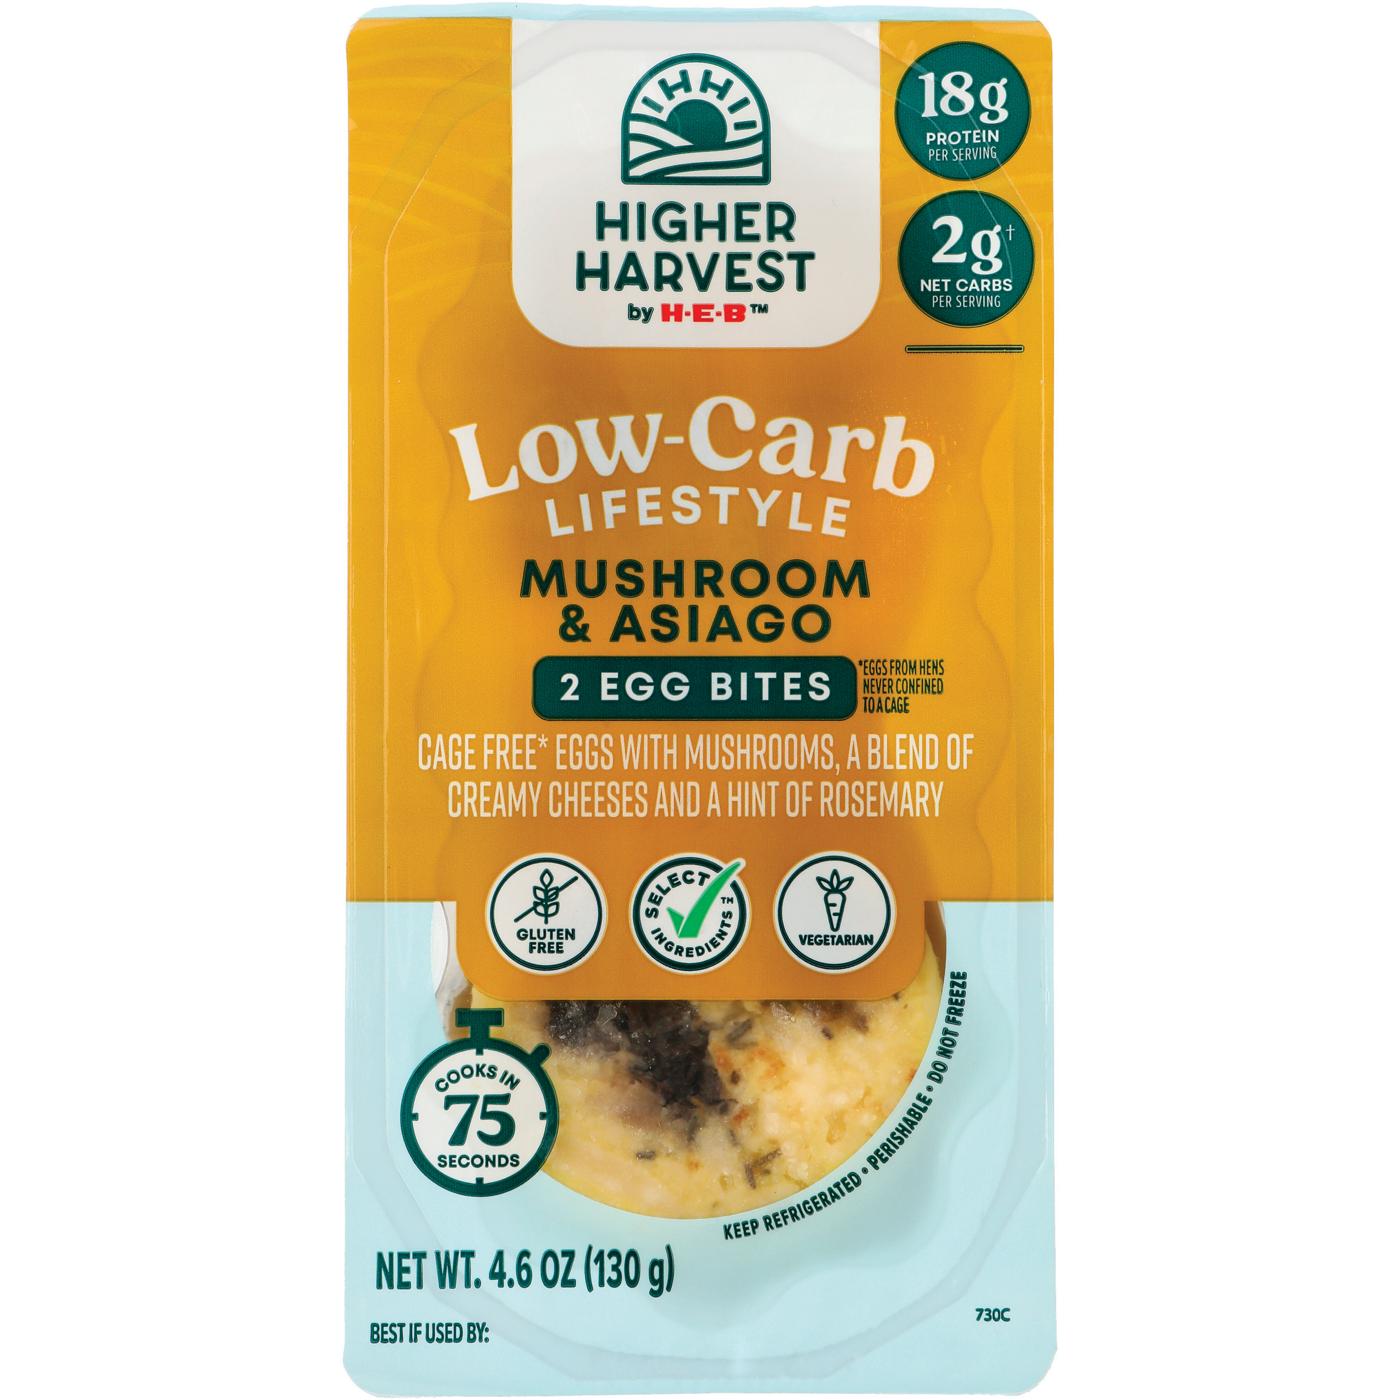 Higher Harvest by H-E-B Low-Carb Lifestyle Egg Bites – Mushroom & Asiago Cheese; image 1 of 2